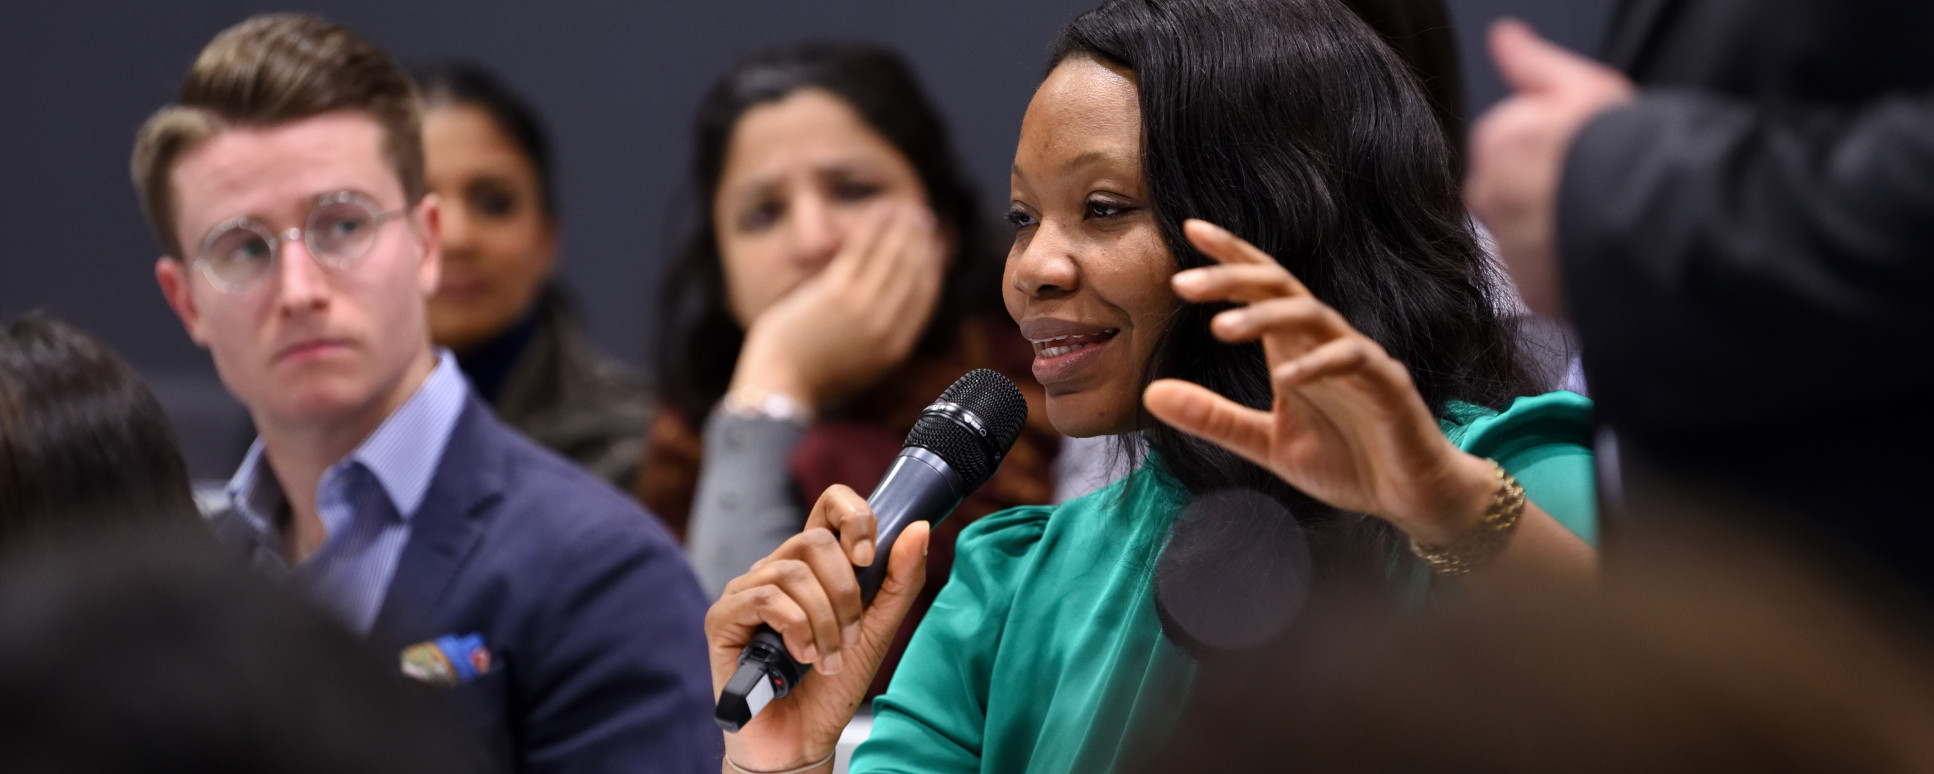 Woman smiles as she speaks into a microphone at a previous healthcare event